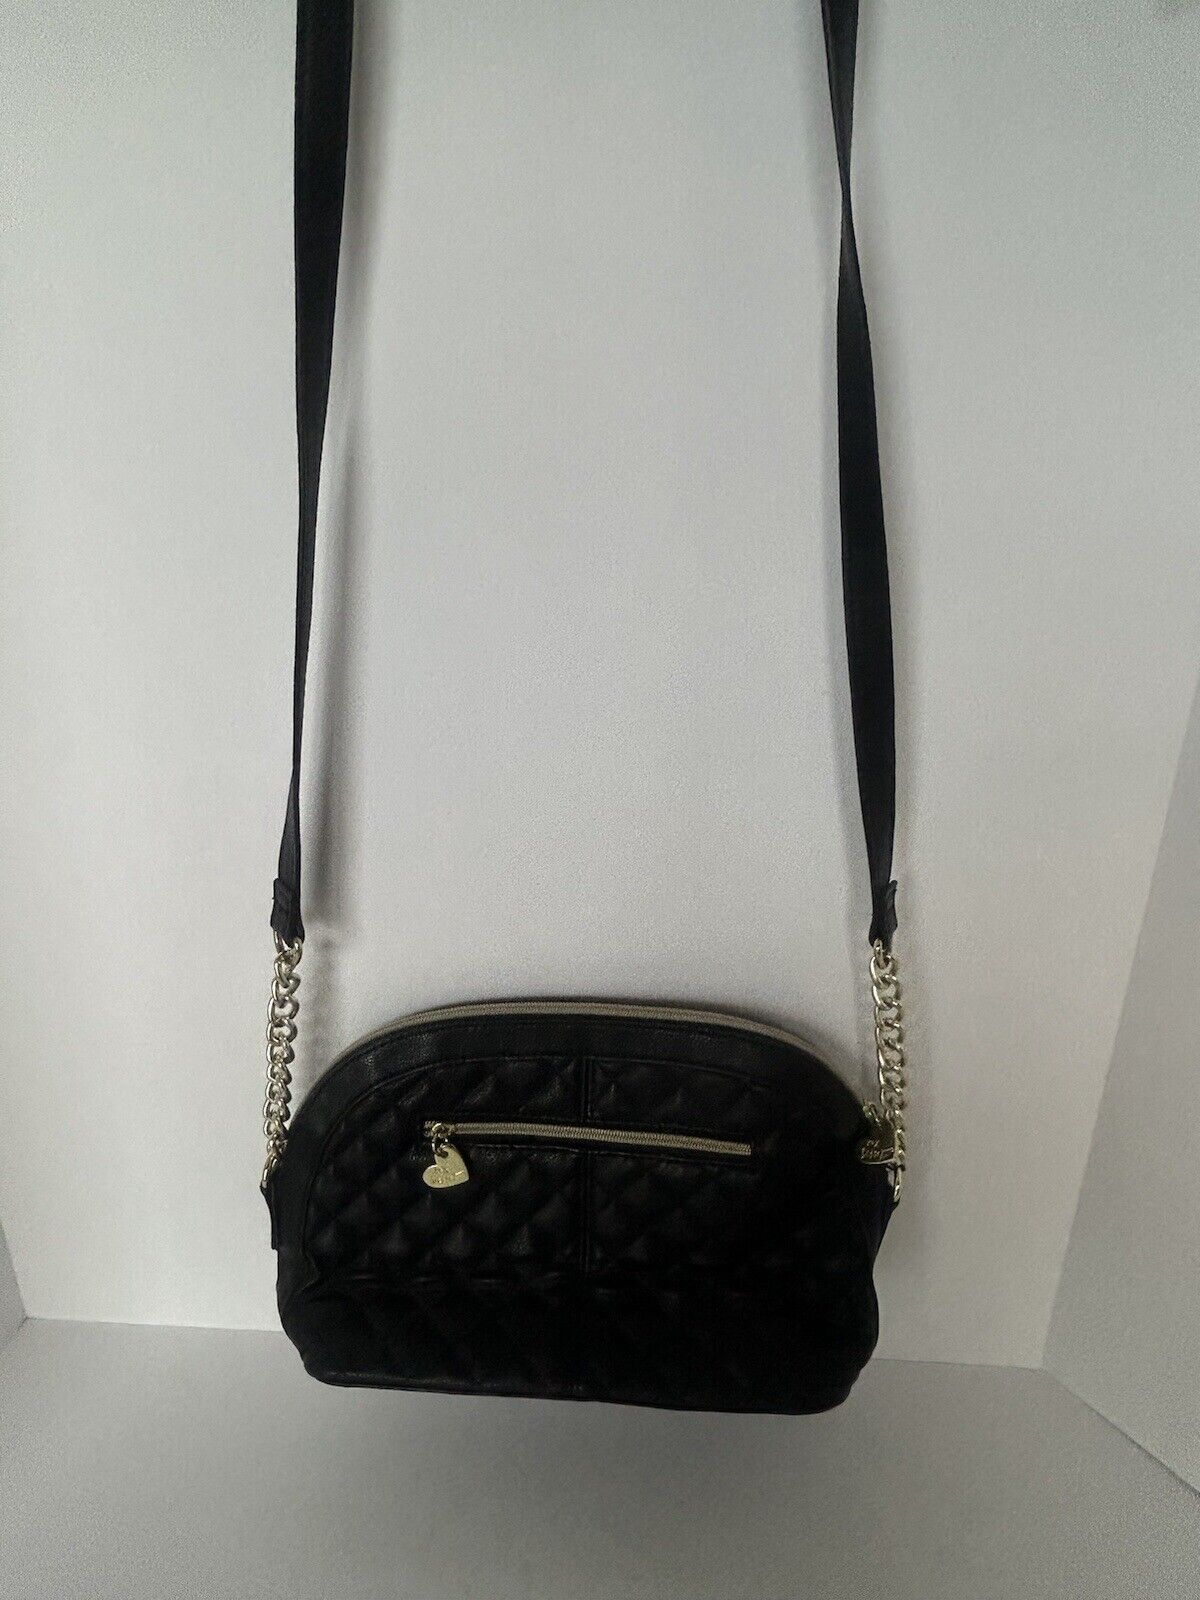 Betsey Johnson Bag Black Quilted with Bow Gold Ch… - image 3